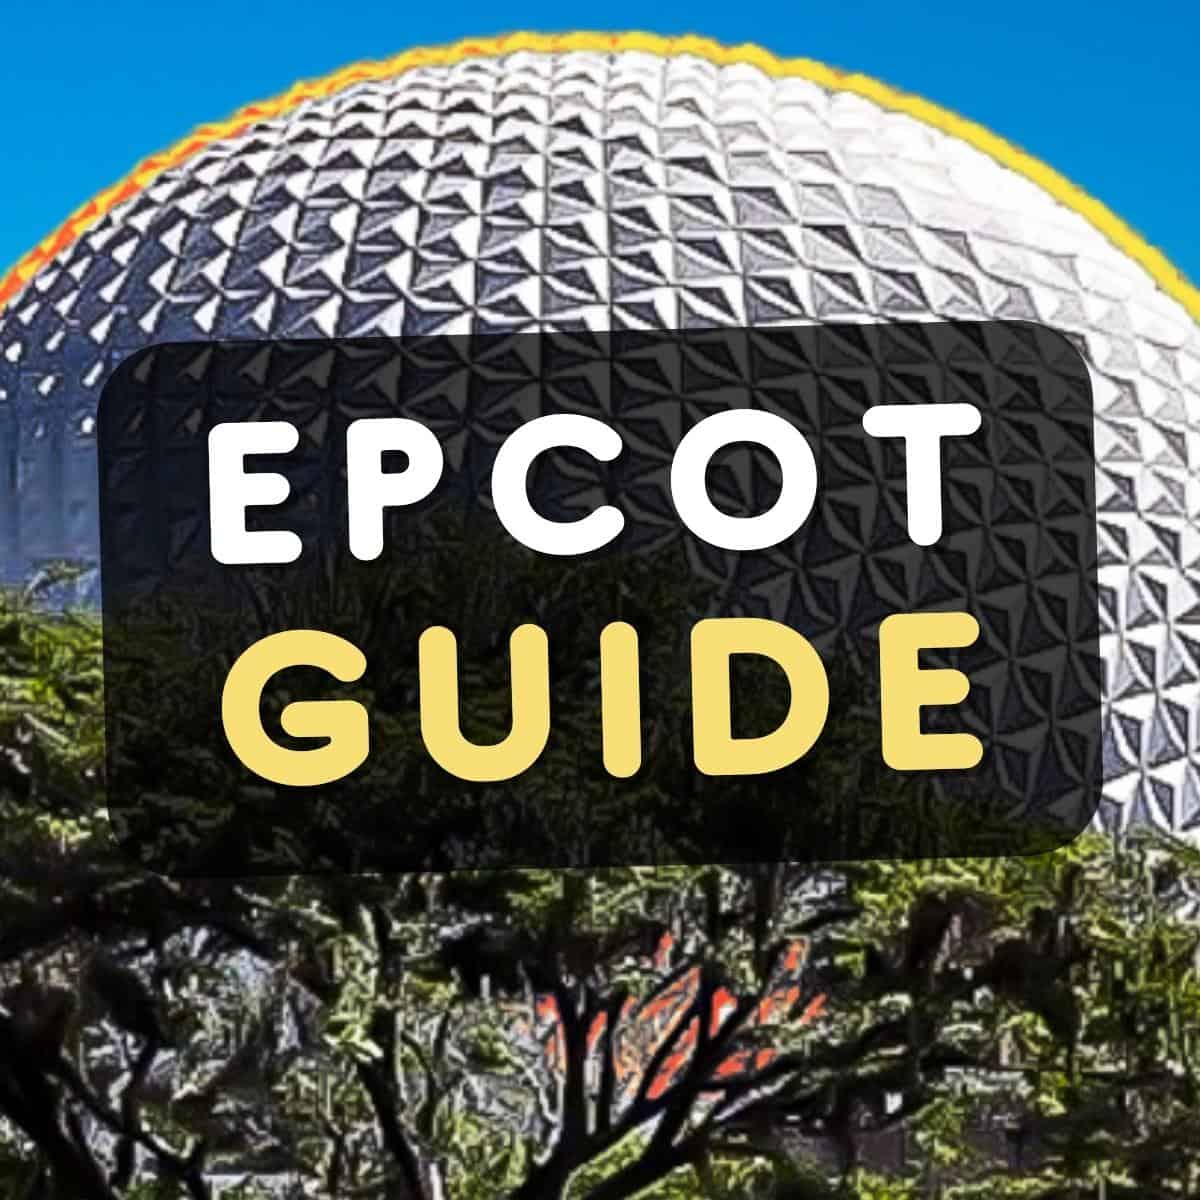 Disney World Epcot Guide with Epcot Ball